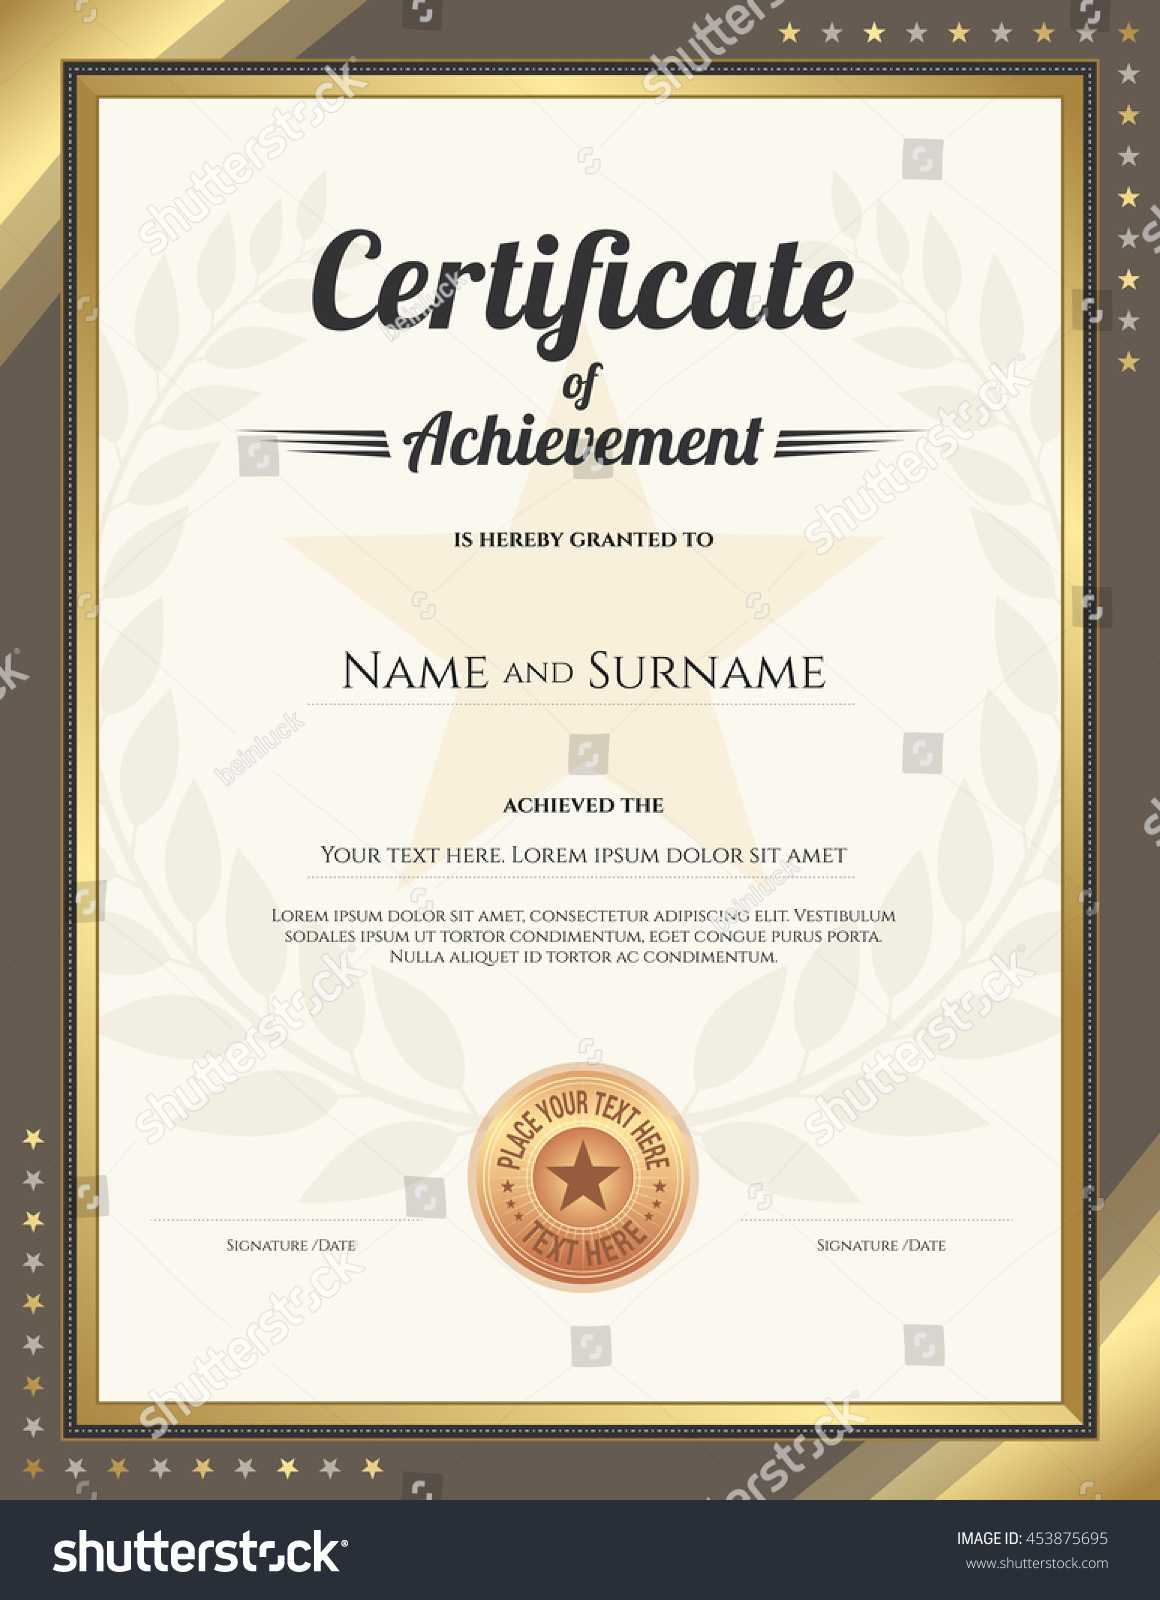 Portrait Certificate Achievement Template Gold Border Stock For Star Of The Week Certificate Template